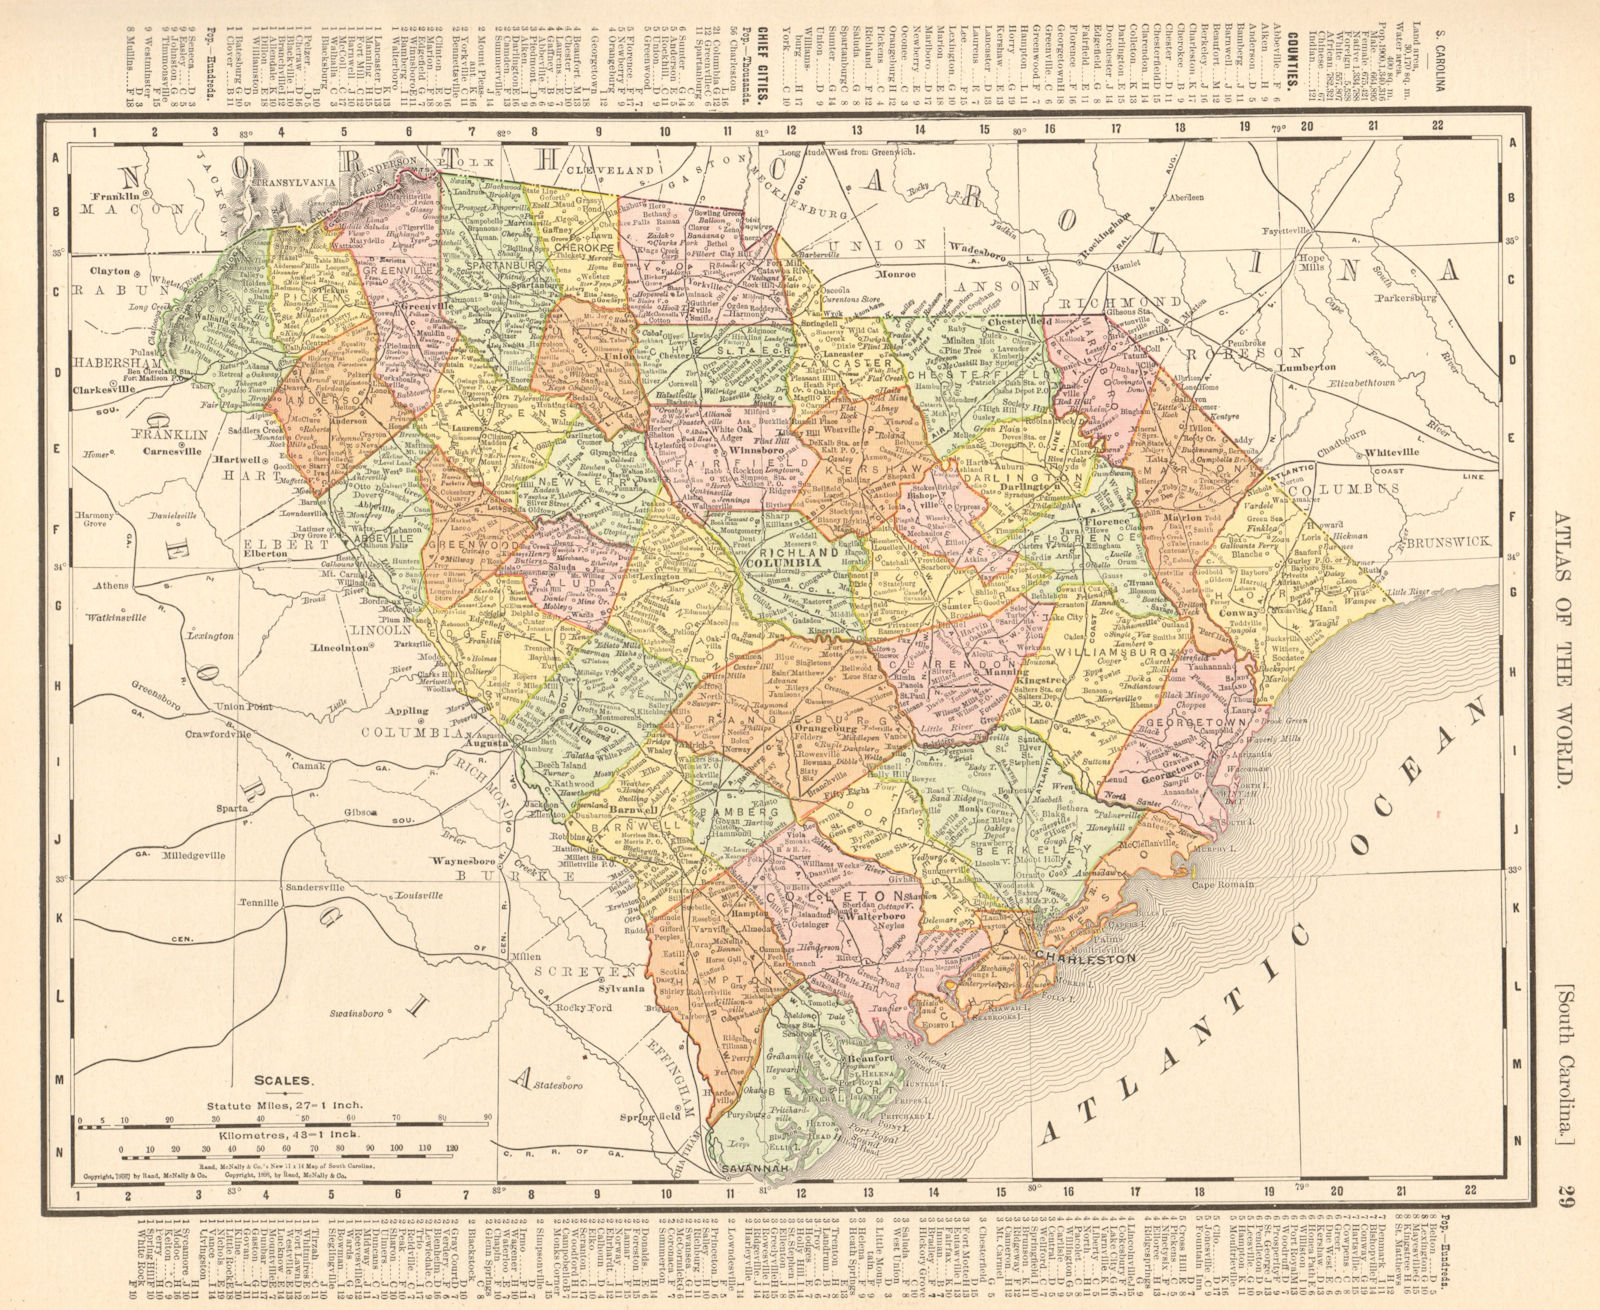 Associate Product South Carolina state map showing counties. RAND MCNALLY 1906 old antique